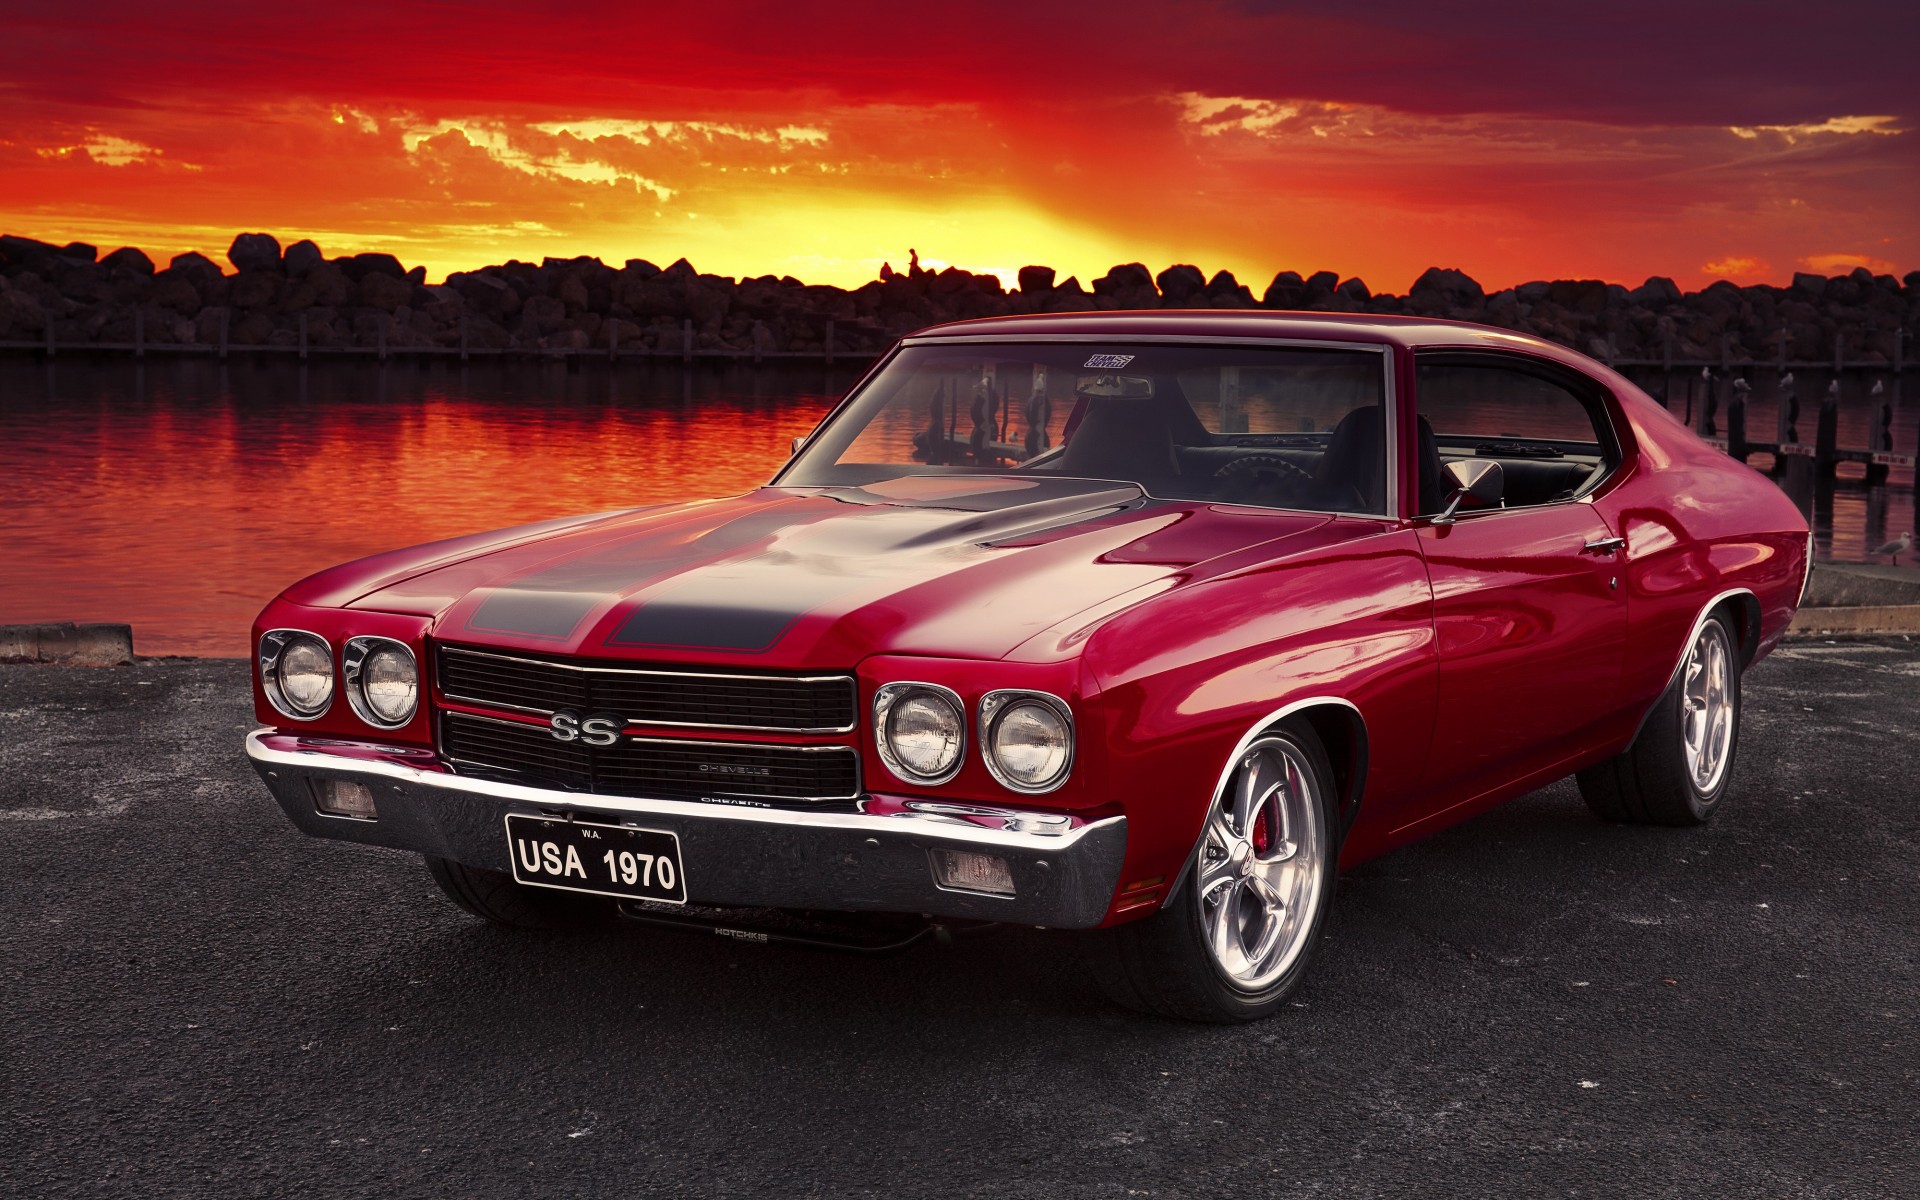 HQ Chevrolet Chevelle Wallpapers | File 551.44Kb